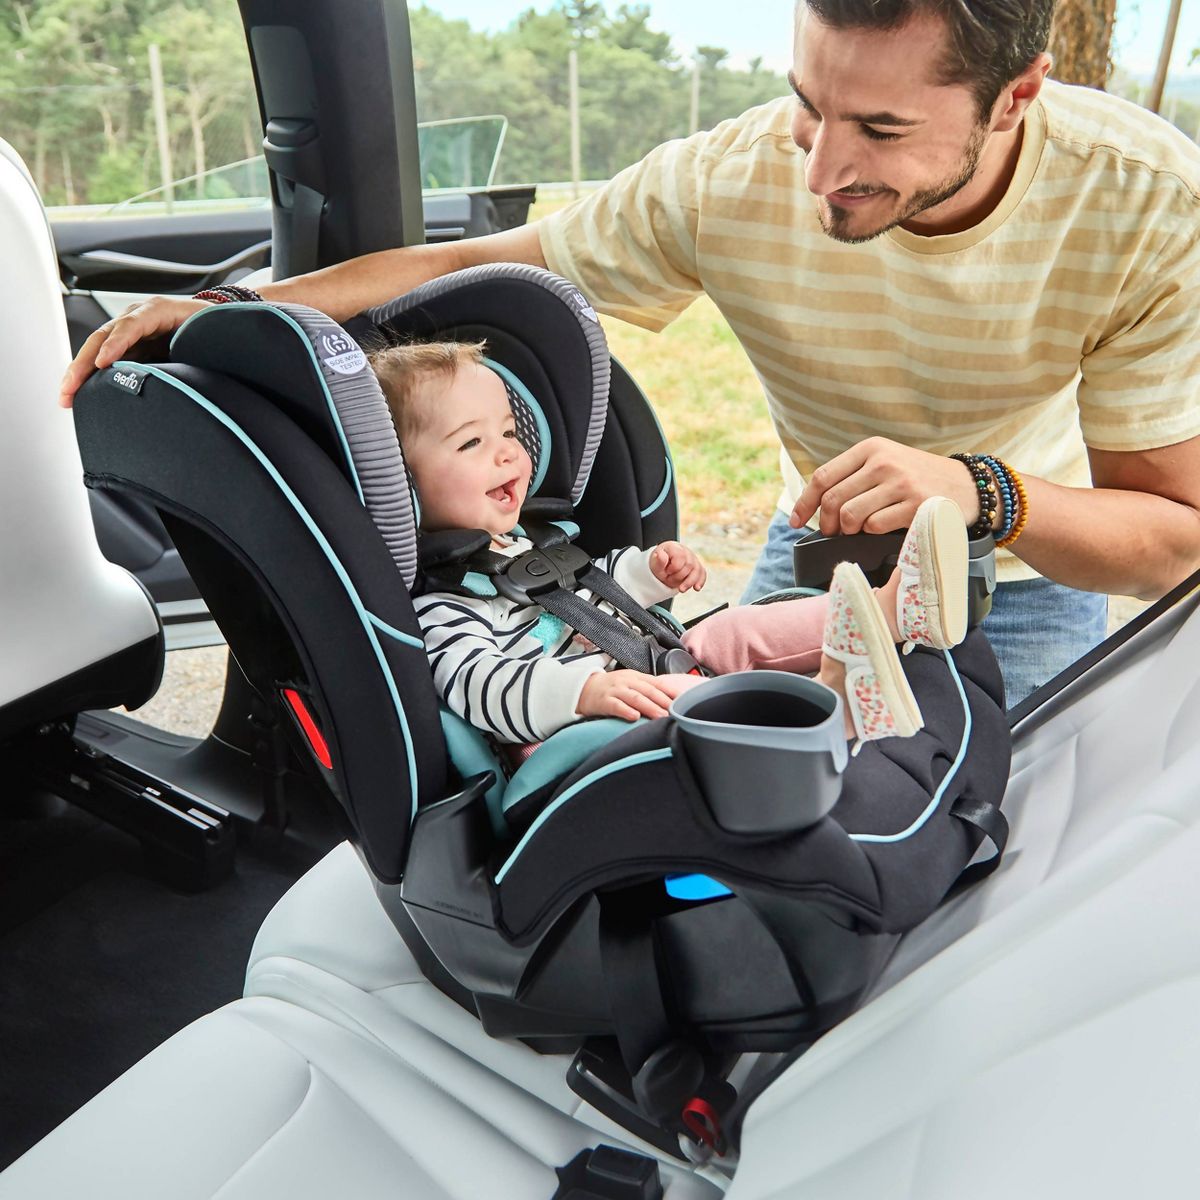 New Evenflo EveryFit 4-in-1 Convertible Car Seat - Atlas